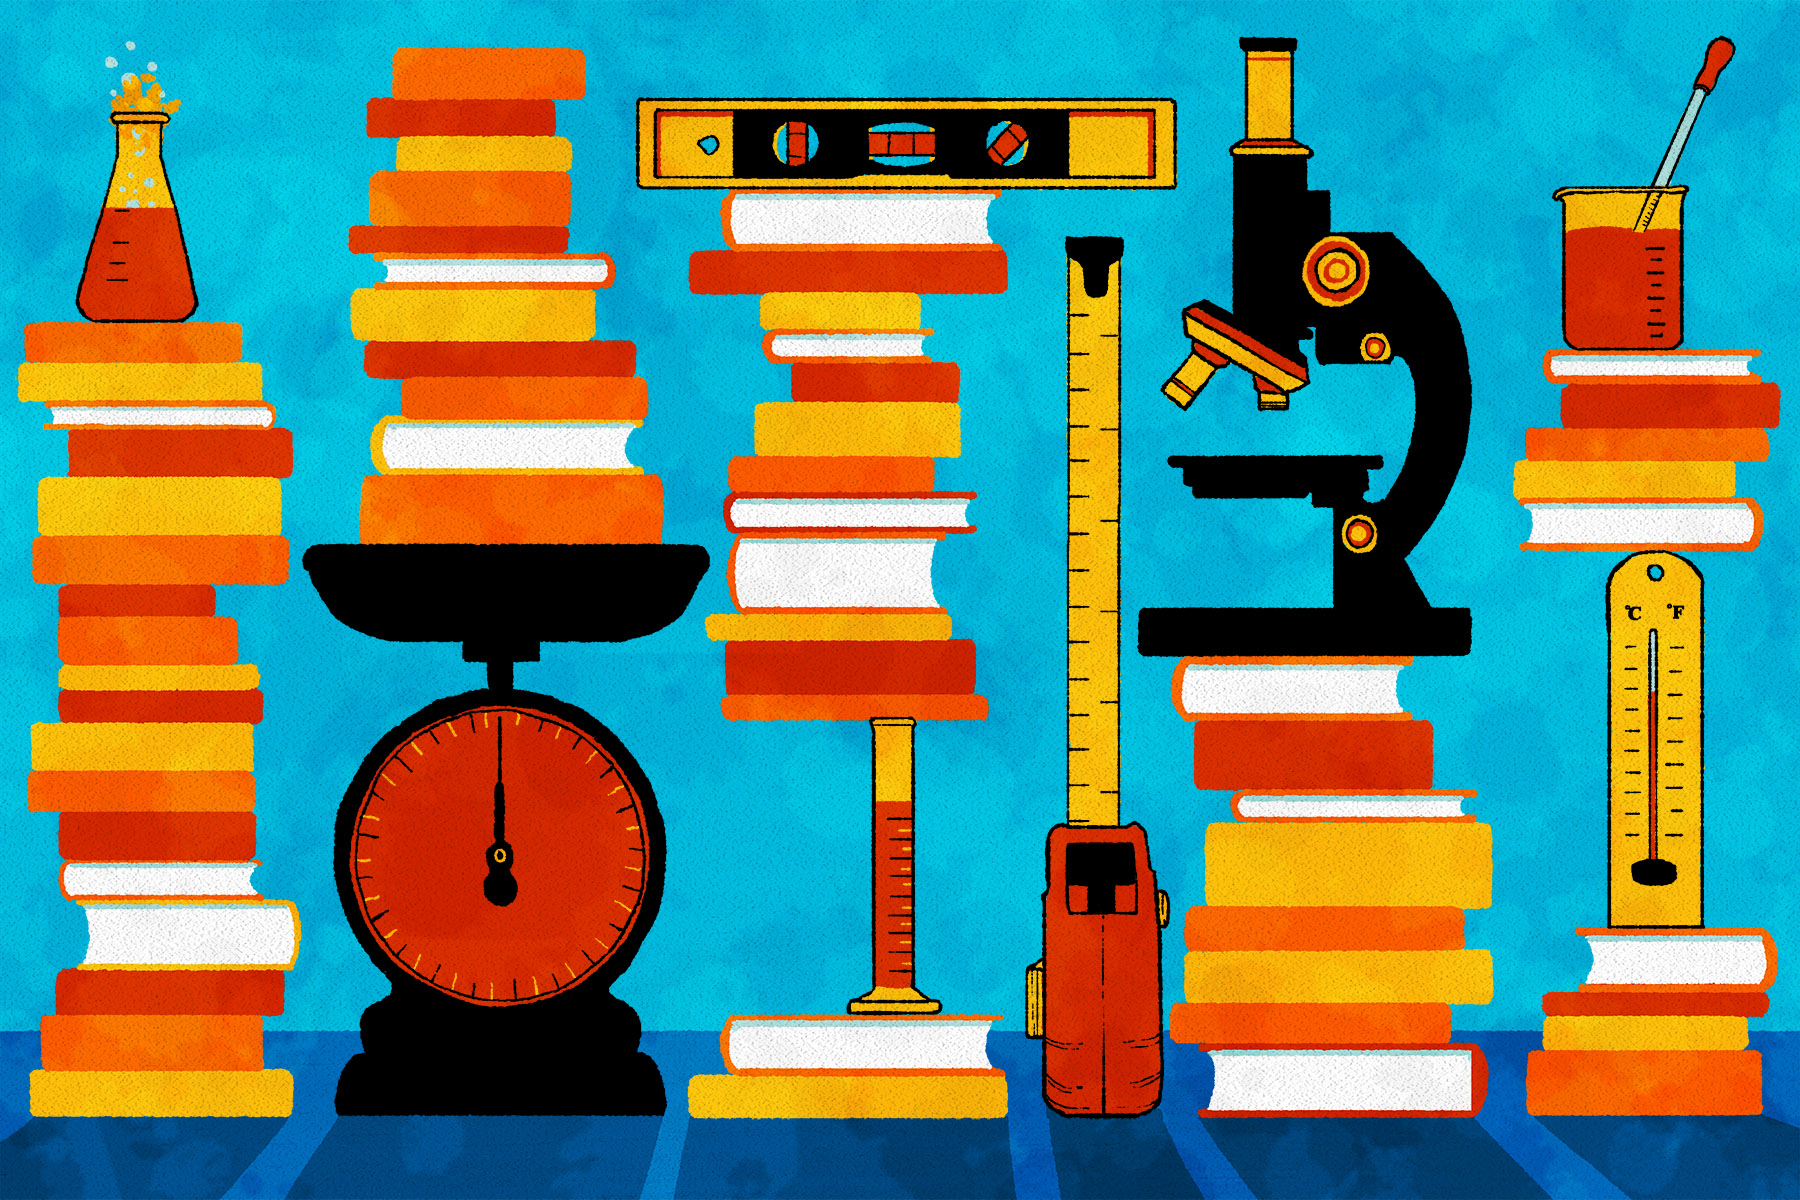 An illustration of a series of mathematical and scientific measuring tools, weighing and measuring piles of books.